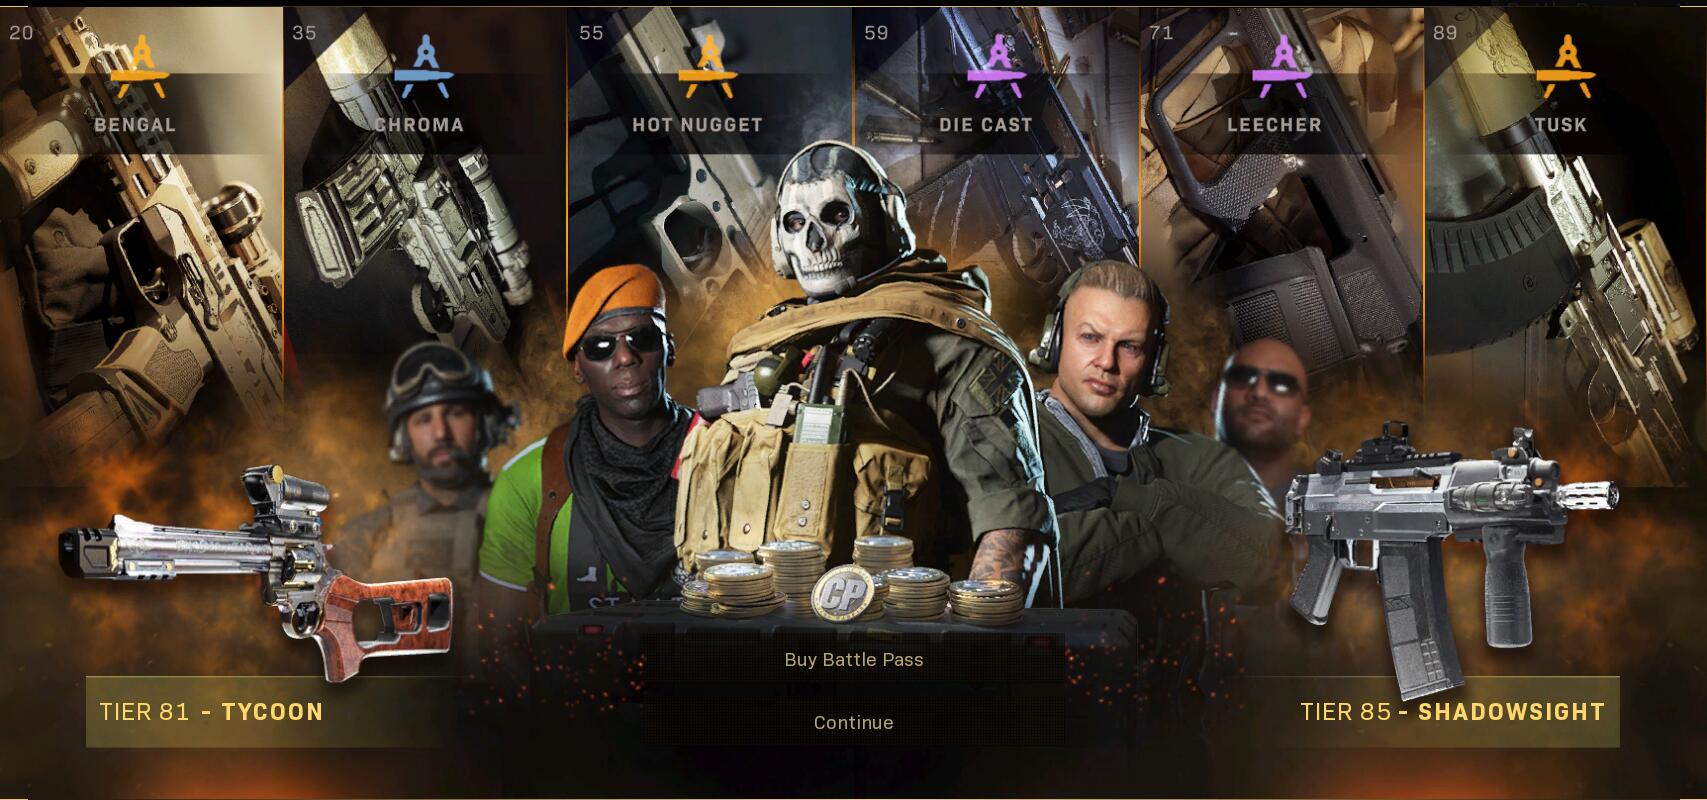 COD Mobile Epic soldier: Here's how to get them for free - MEmu Blog